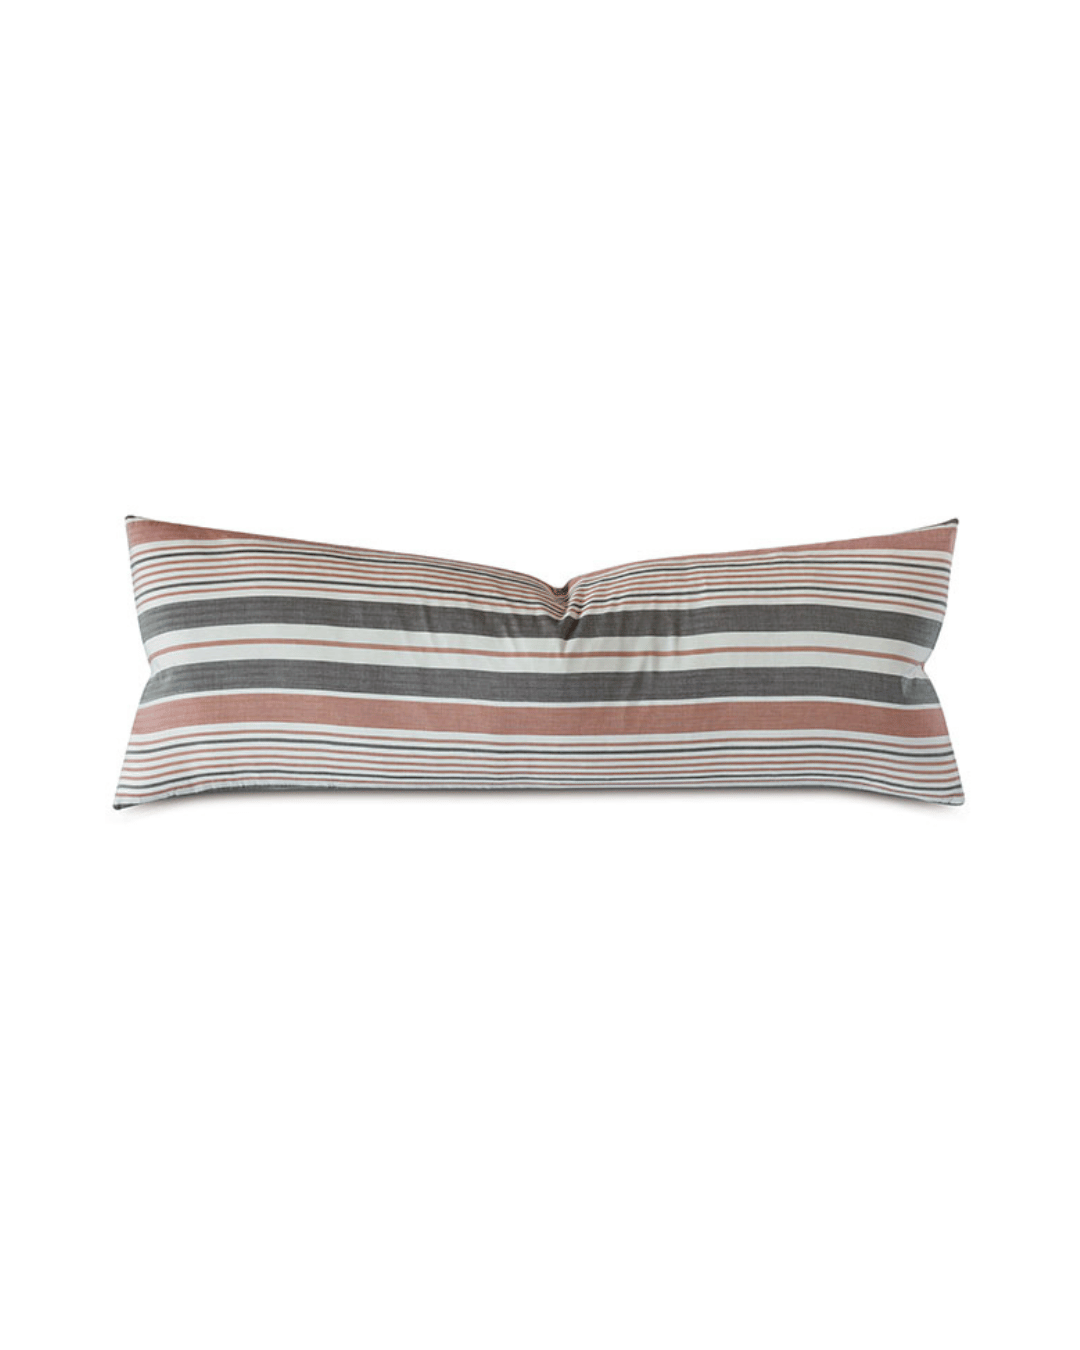 A rectangular Chil Striped Pillow with horizontal stripes in shades of brown, gray, and white, evoking the stylish aesthetic of a Scottsdale Arizona bungalow, isolated on a white background by Eastern Accents.